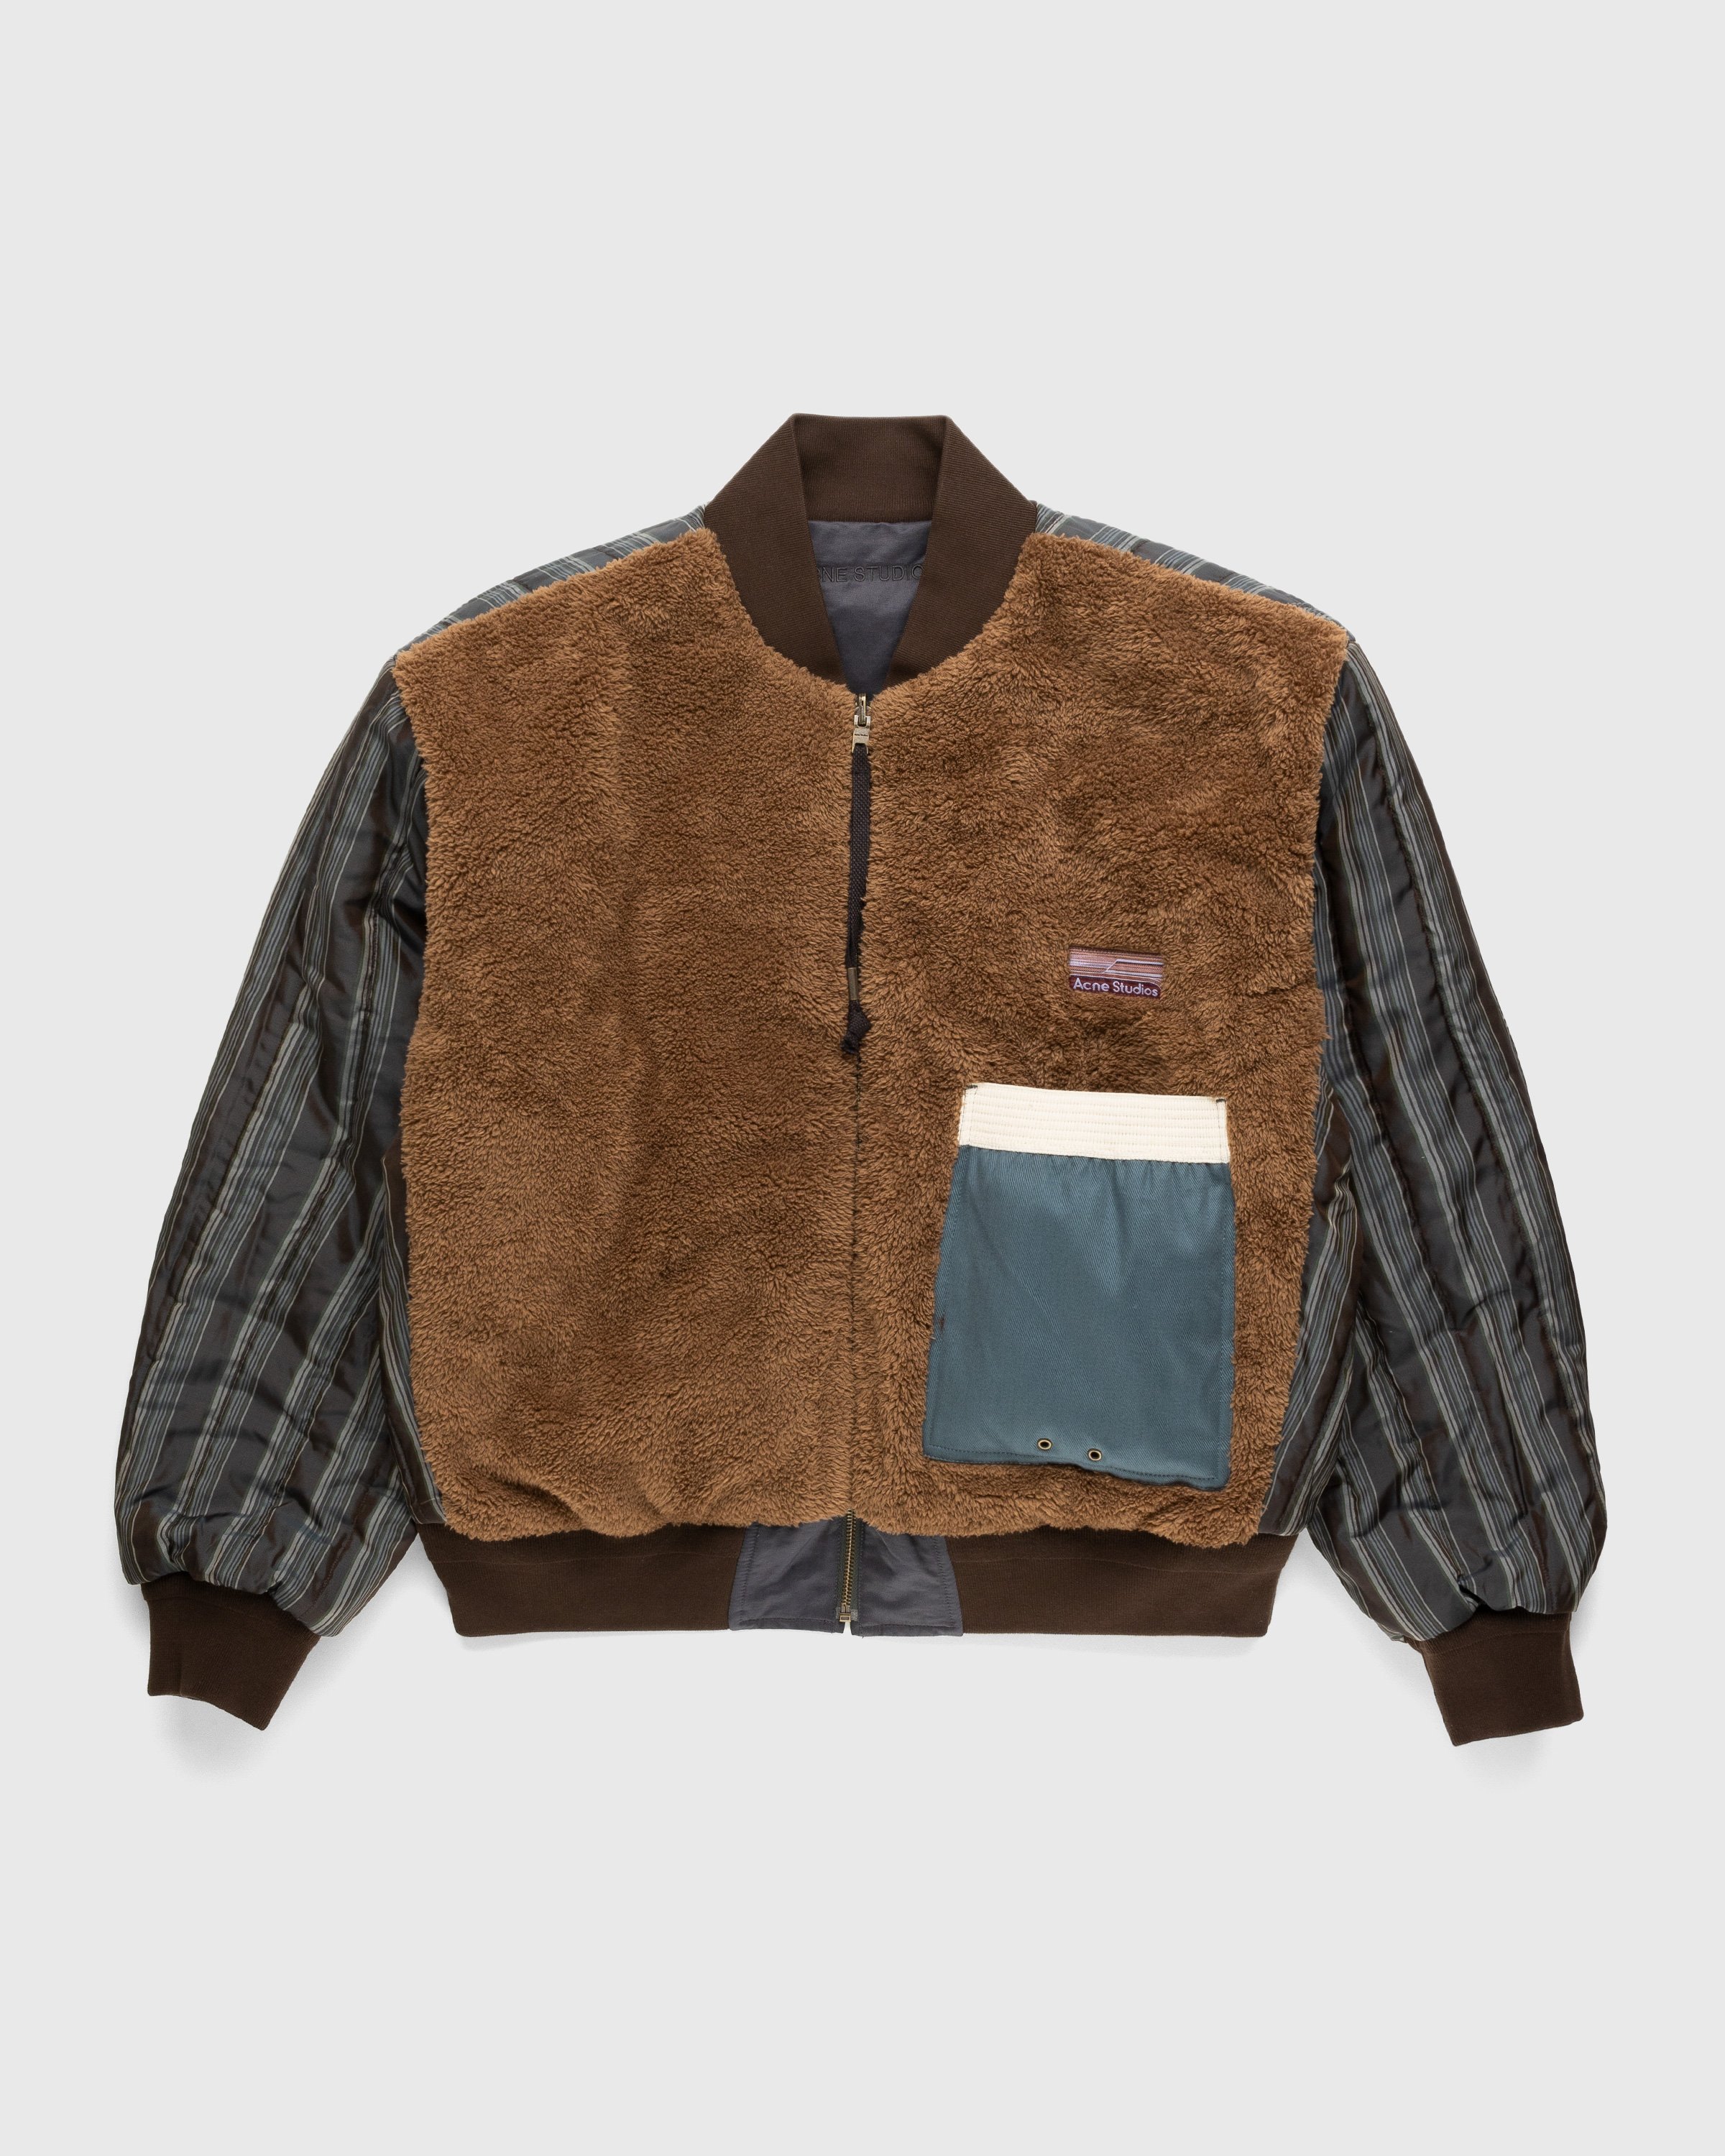 Acne Studios - Reversible Patch Bomber Jacket Anthracite Grey - Clothing - Brown - Image 1